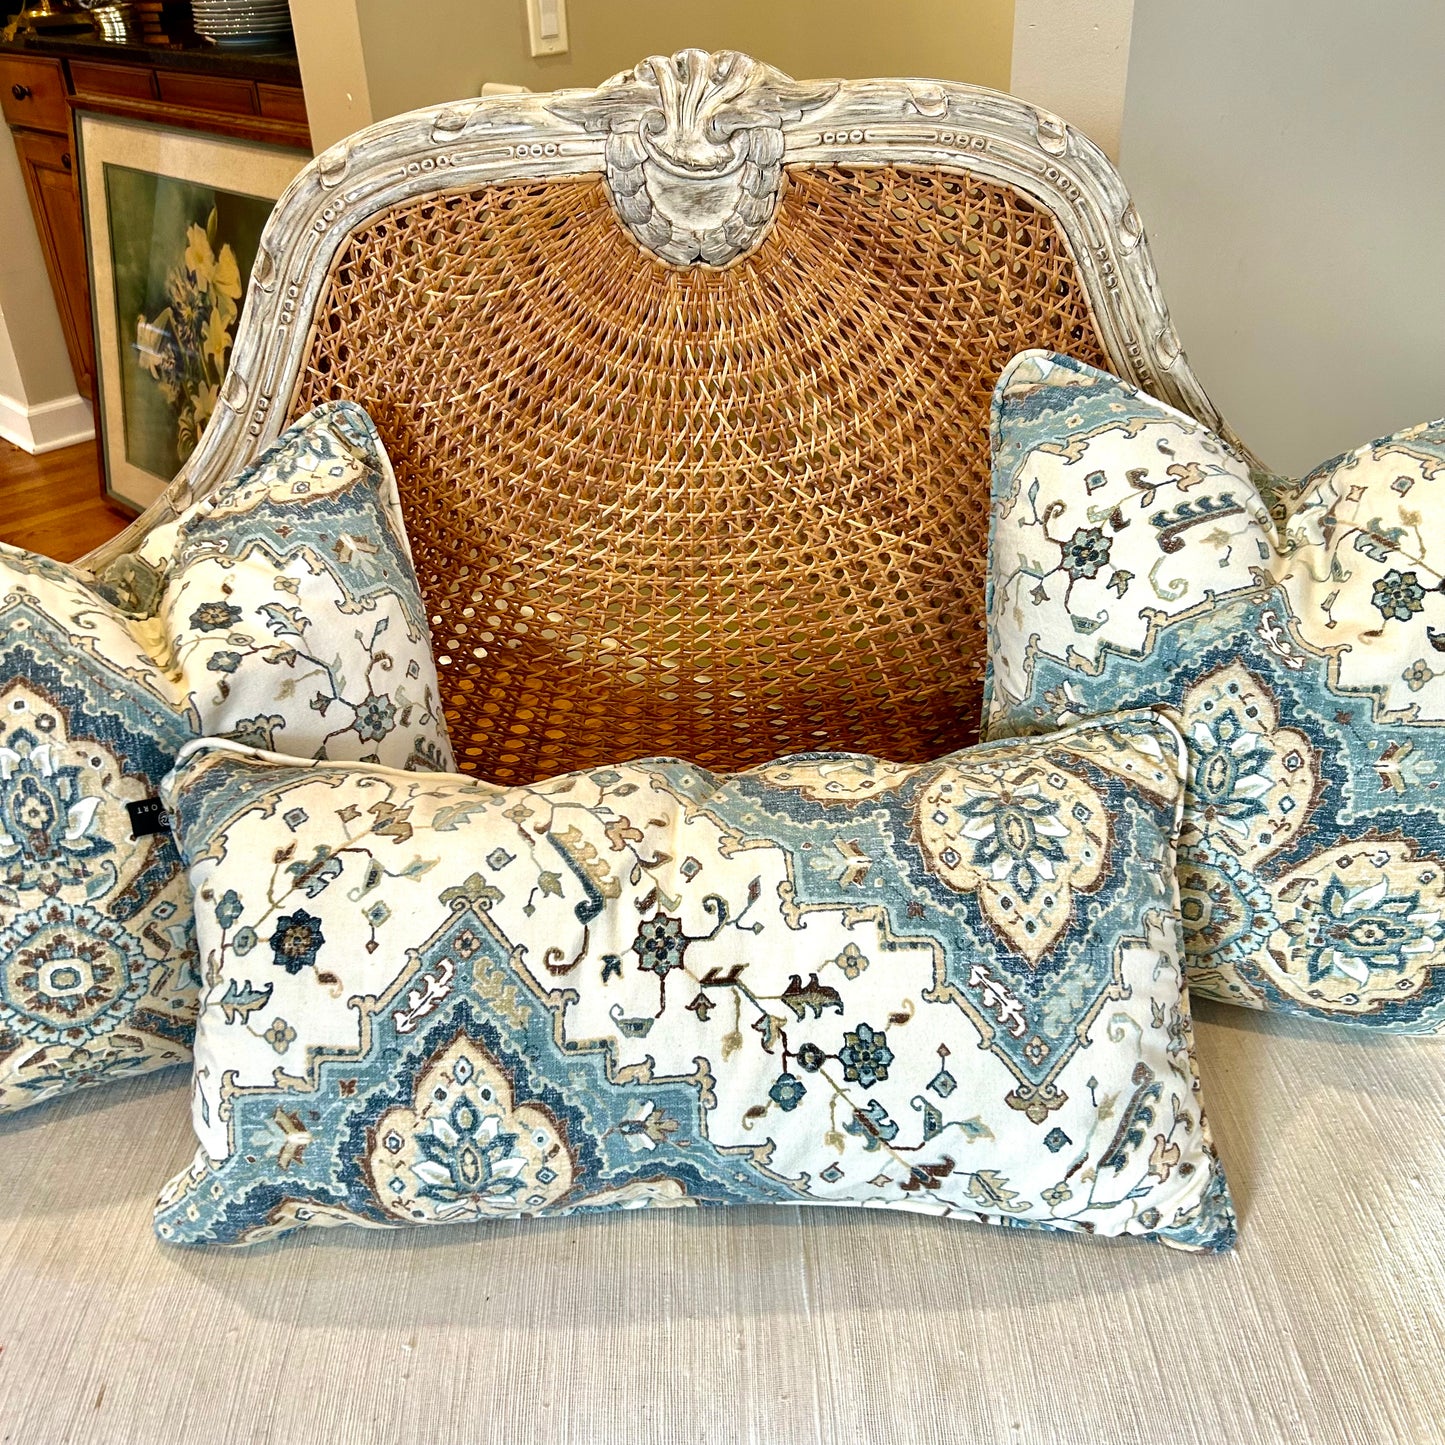 Set of 3 ivory, beige, and blues  designer pillows